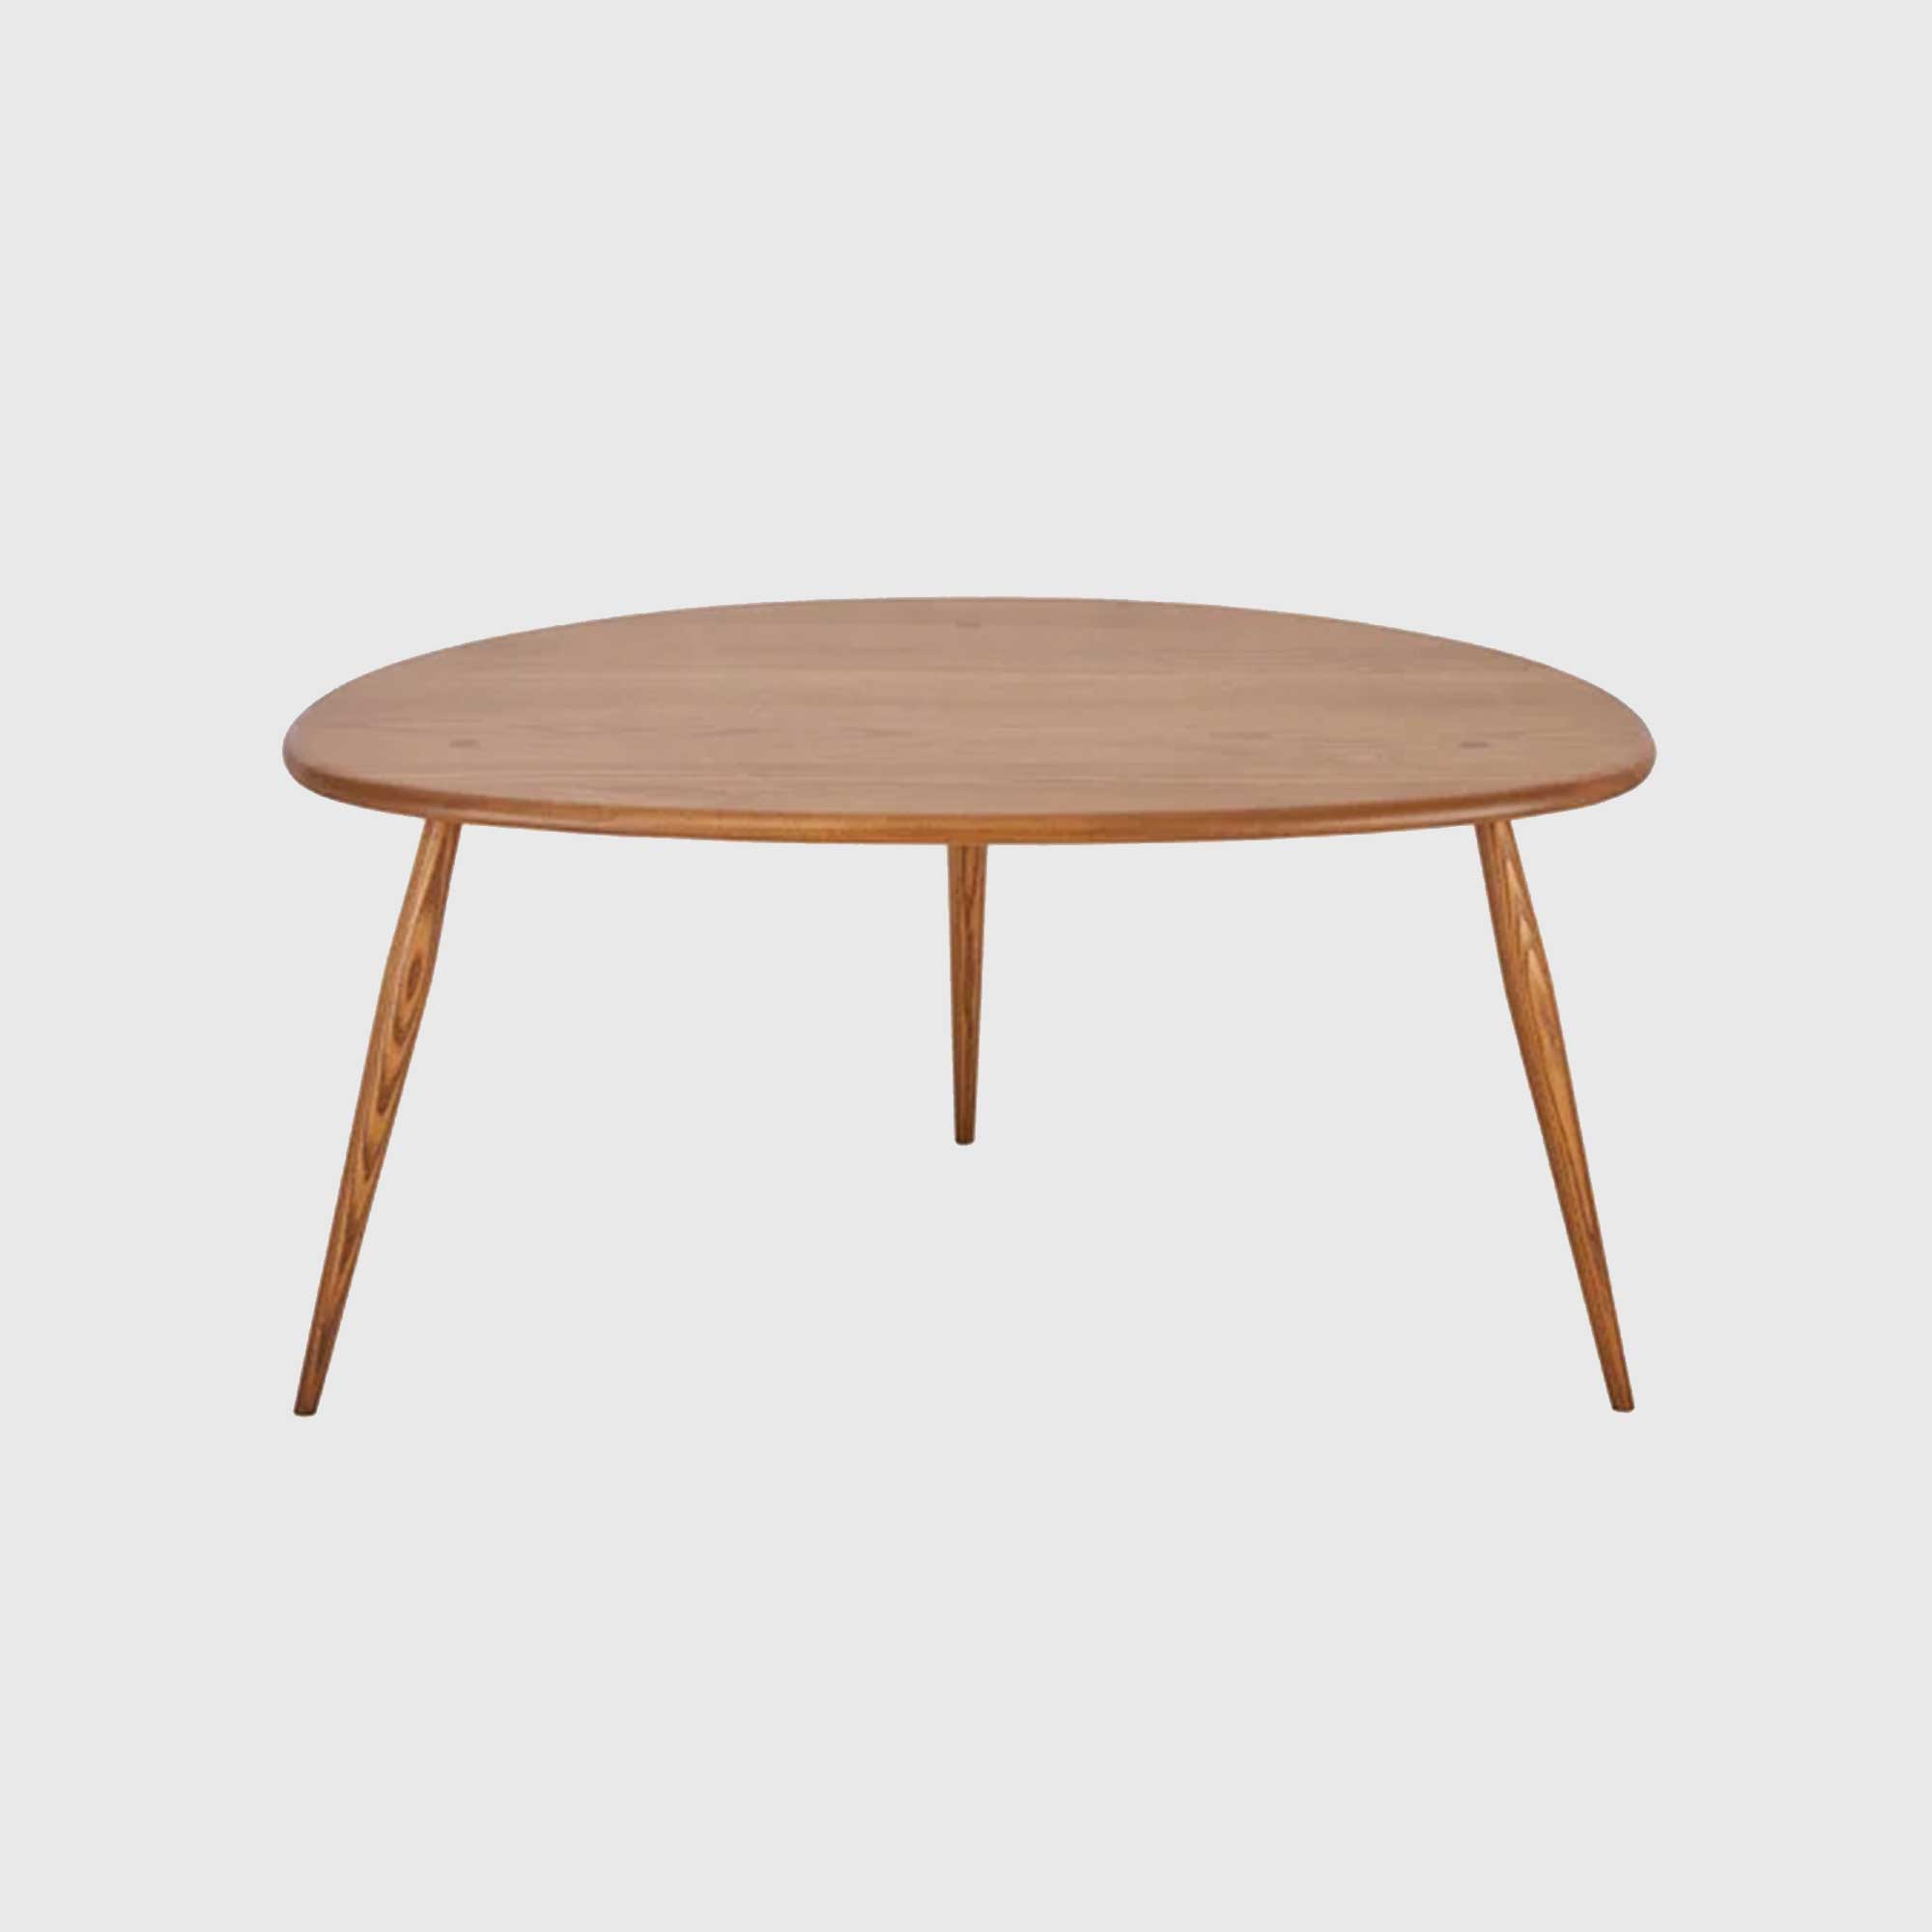 Ercol Pebble Coffee Table, Brown | Barker & Stonehouse